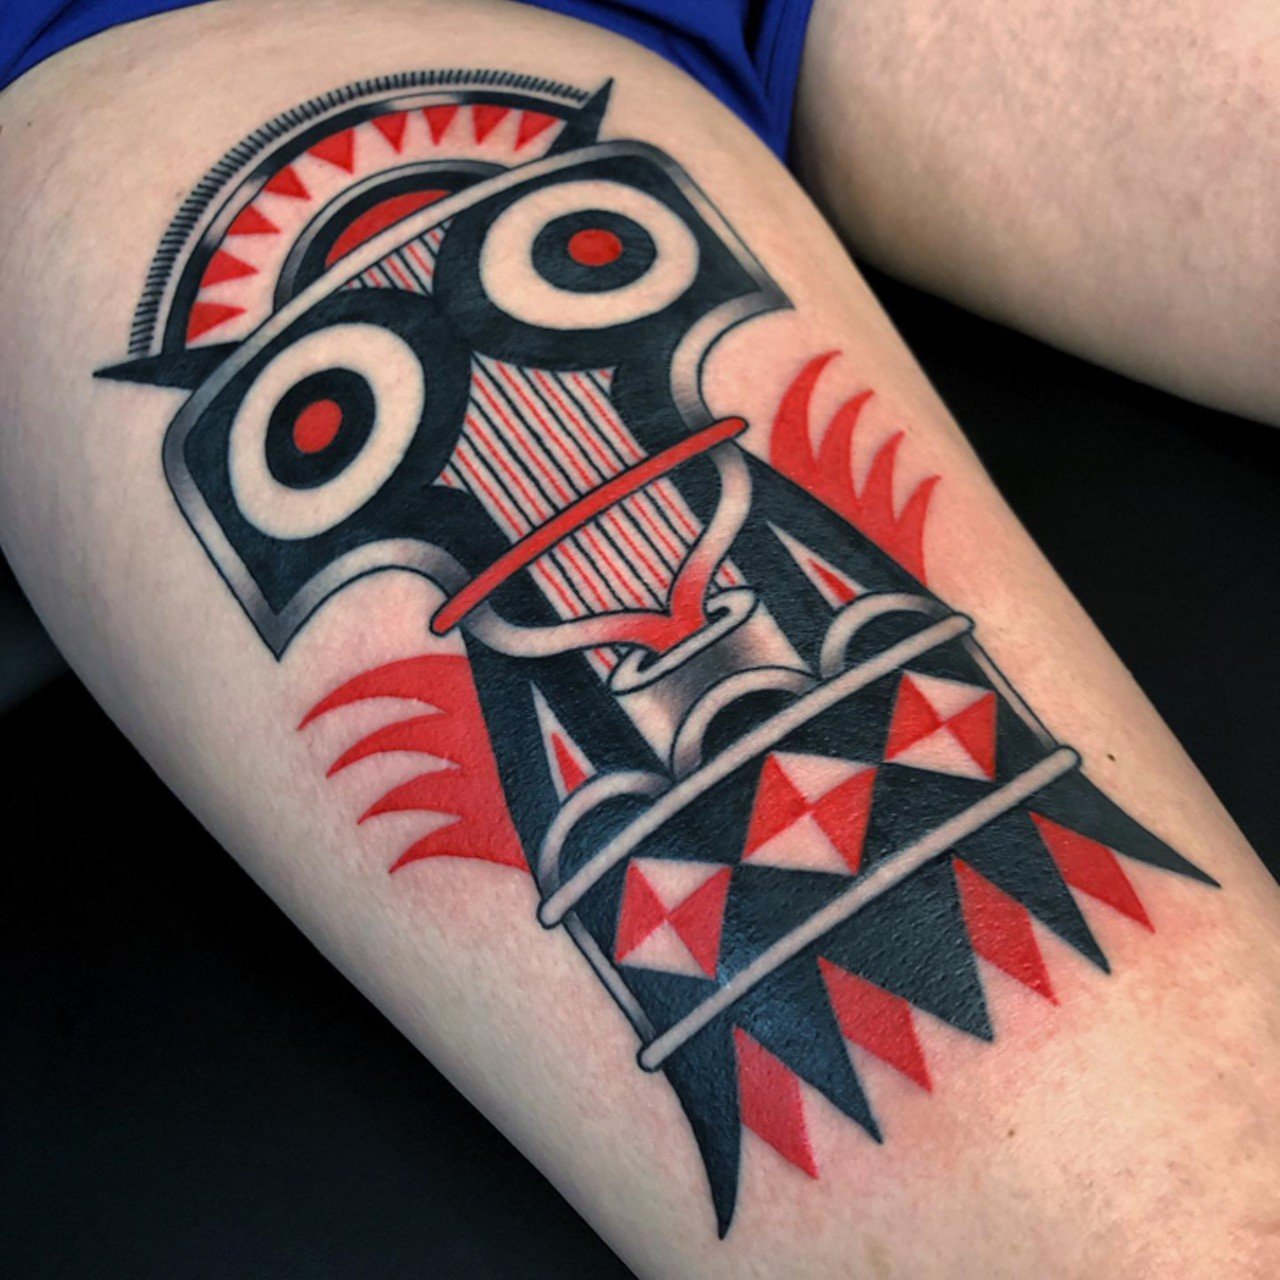 Ben Barnhart  |  @benbarnhart_
Good Karma Tattoo
Barnhart is clearly a master of neotraditional tattooing. Follow him if you like eye-catching designs with plenty of red, yellow, and black.